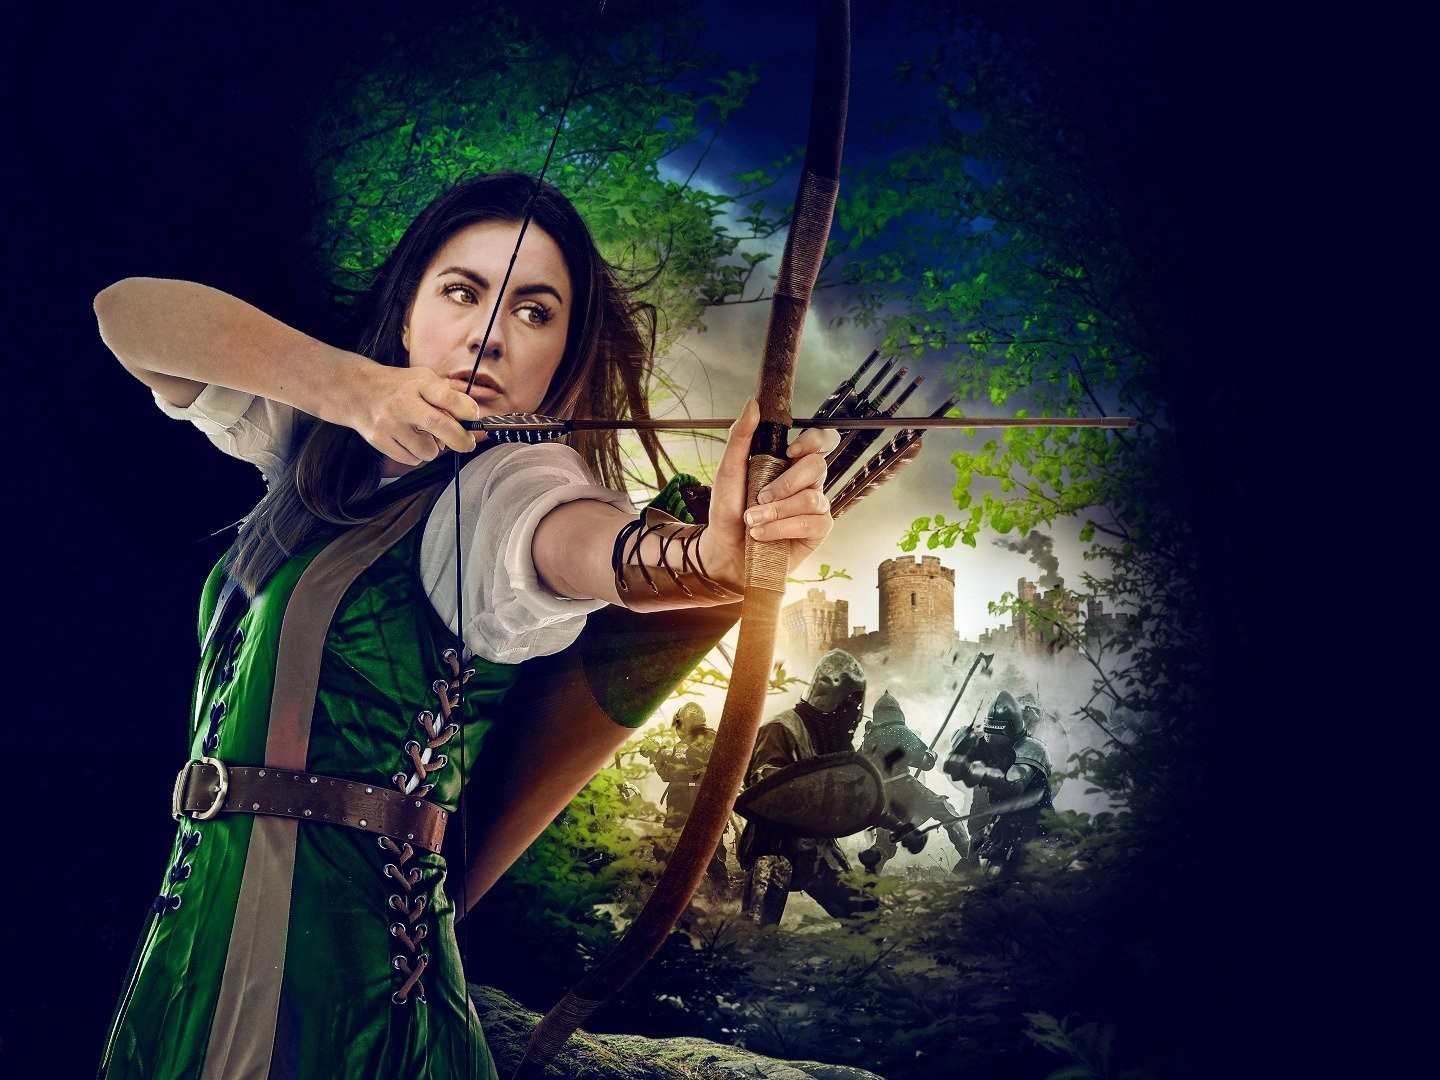 The Adventures Of Maid Marian Release Date, Cast, And Plot - What We Know  So Far